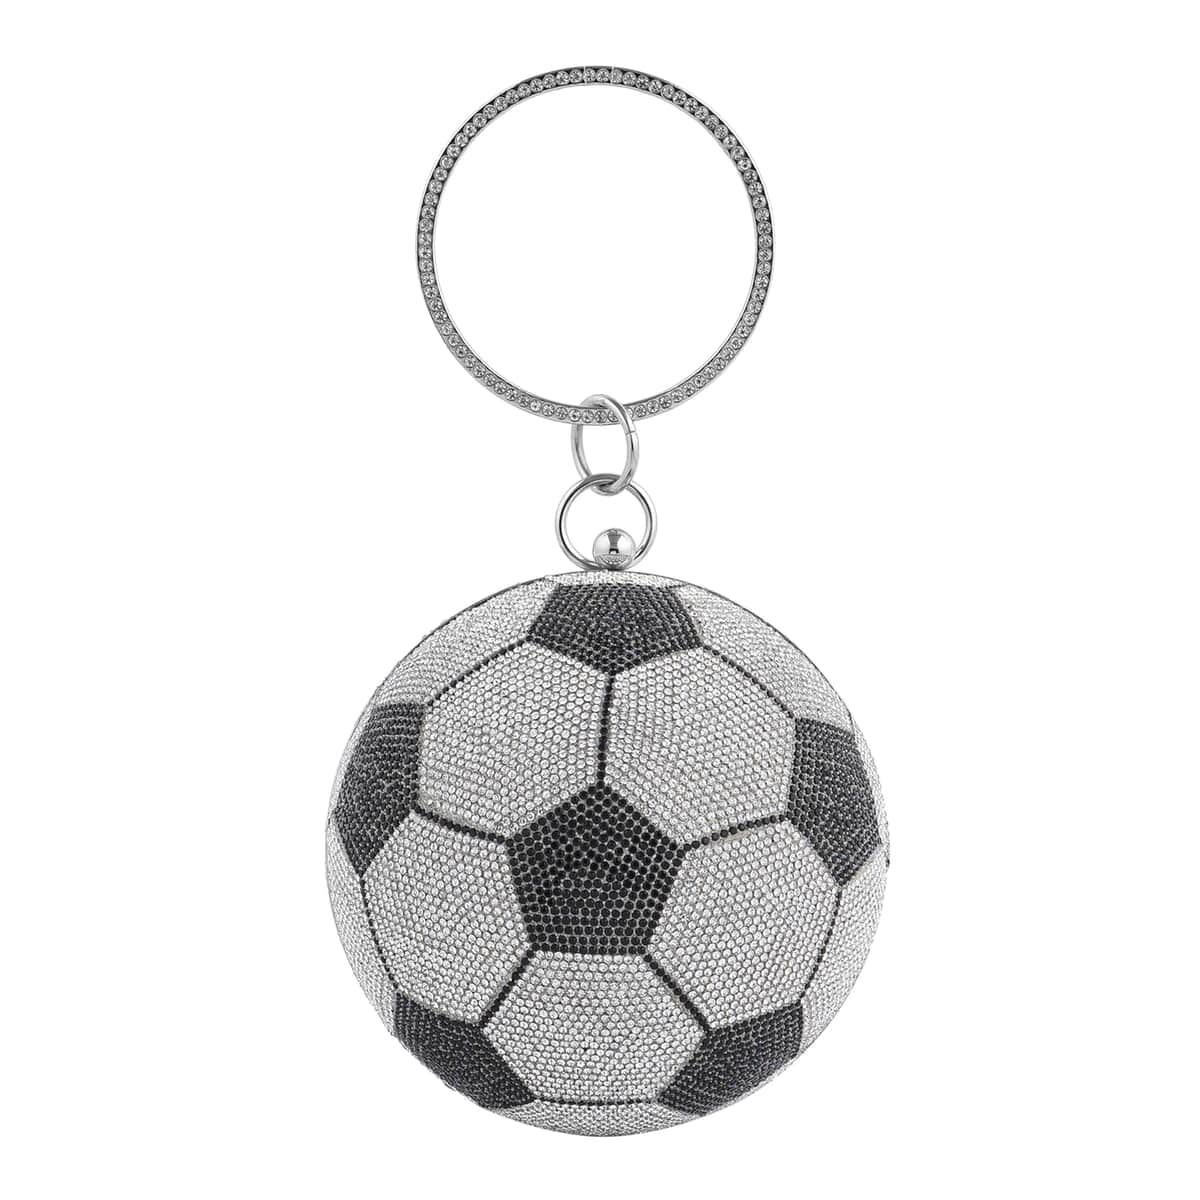 Black & White Crystal Basketball Shape Clutch Bag (D 5.5") wih Chain (47") and Hand Drop (3.25") image number 1